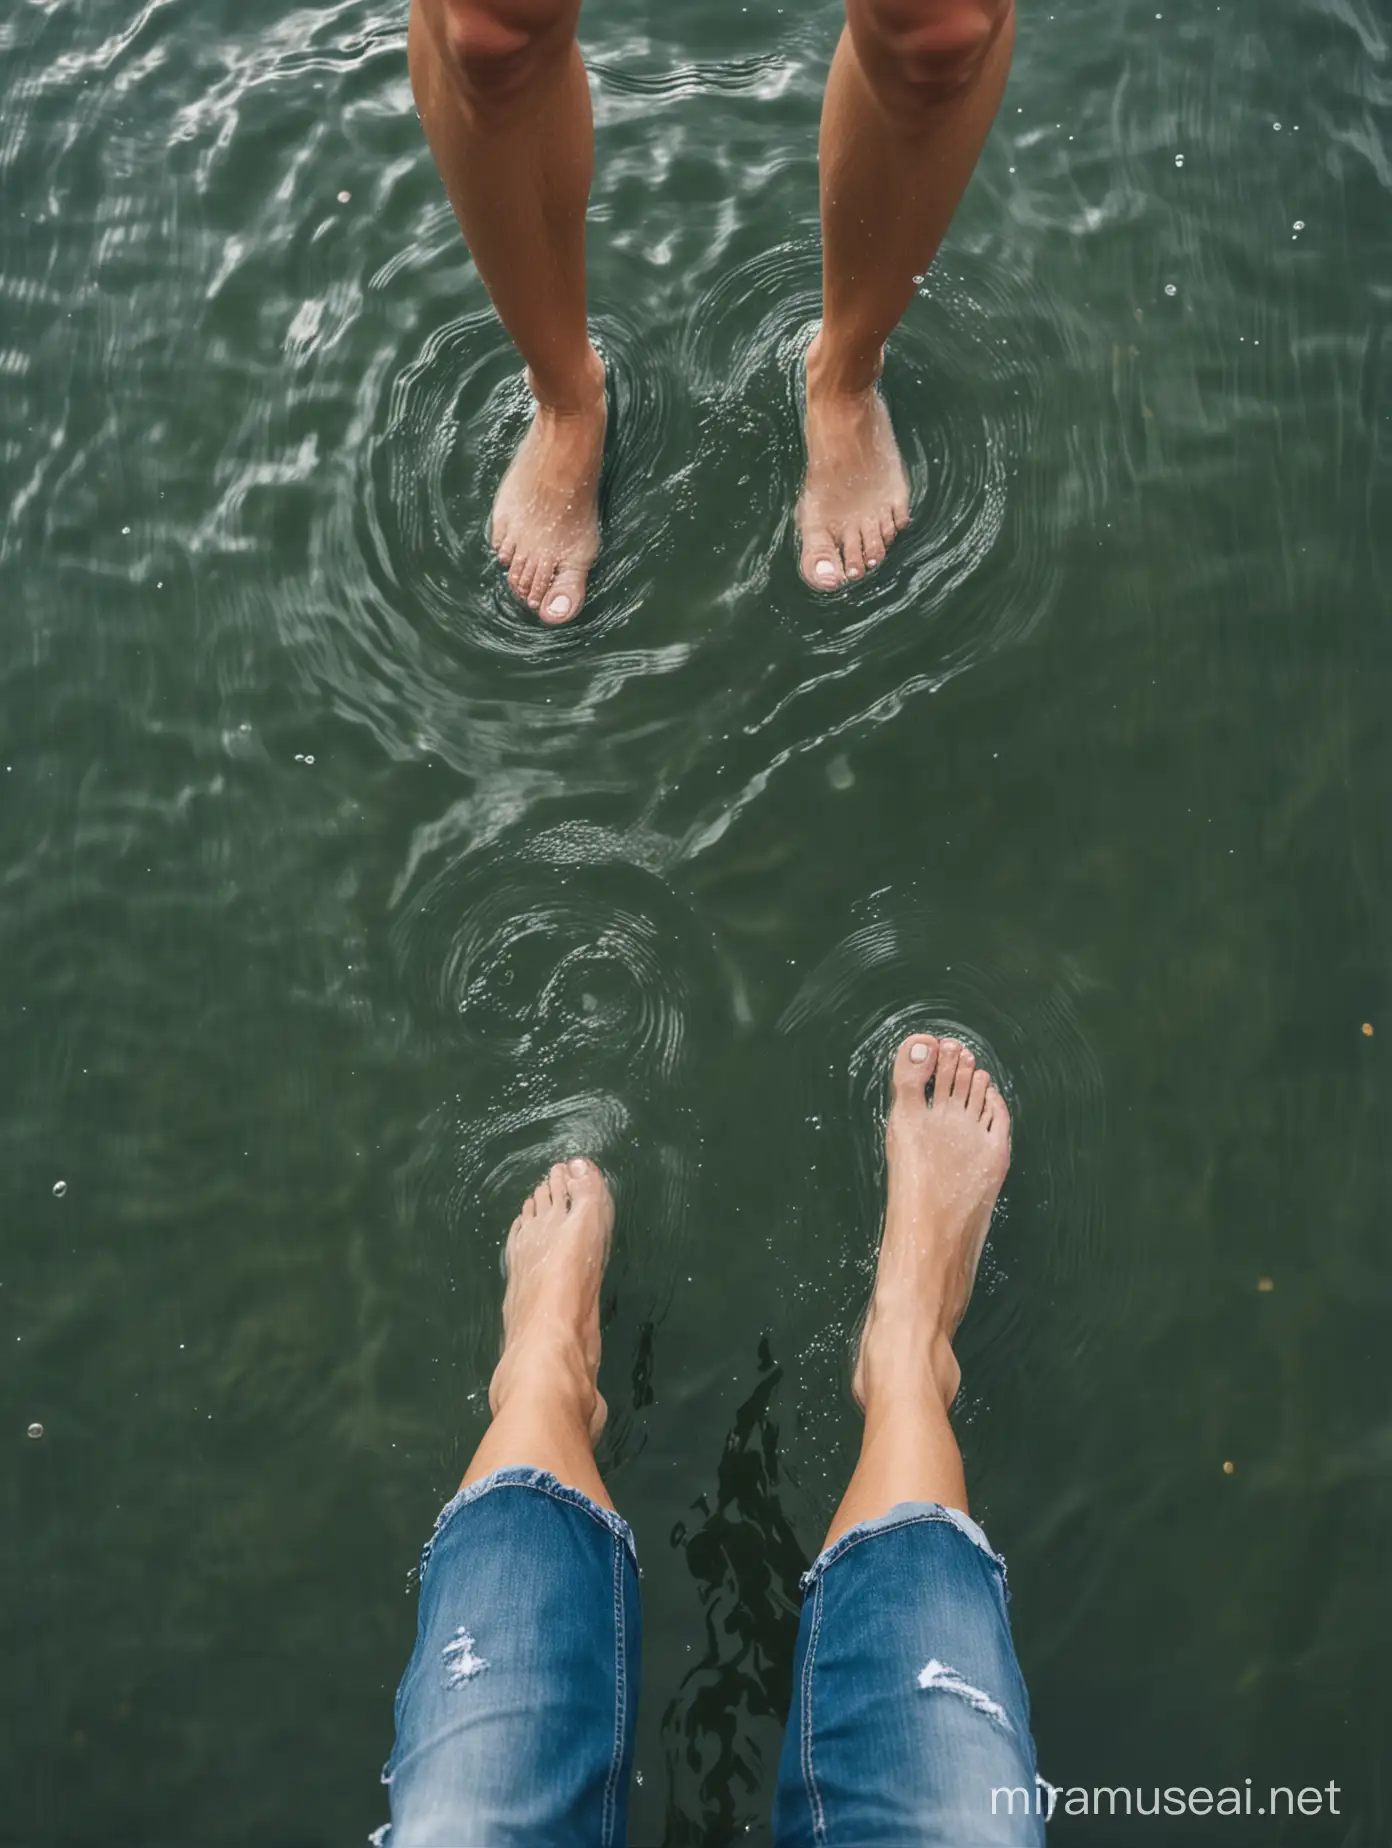 Create an image of feets of two people walking on water. Camera angle is overhead.